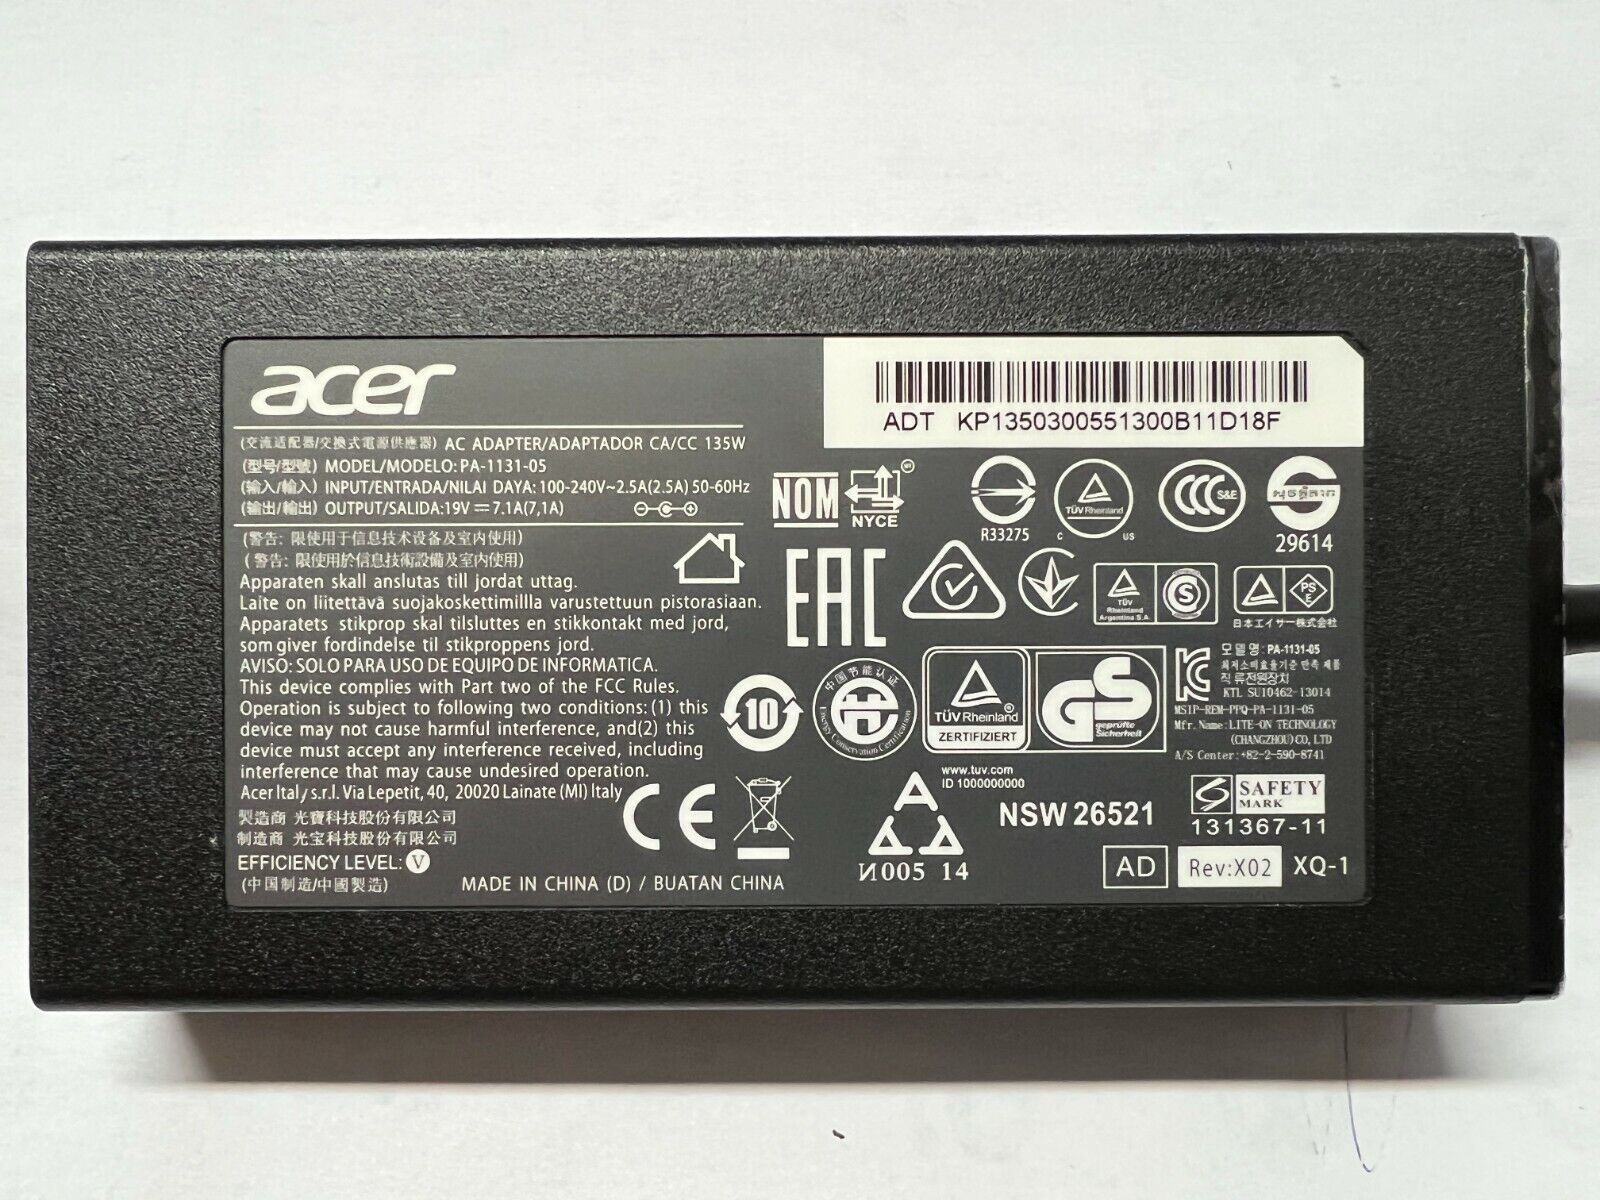 Acer ADP-135KB T 135W Ac Adapter PA-1131-05 5.5mm Purple Tip For Acer Aspire